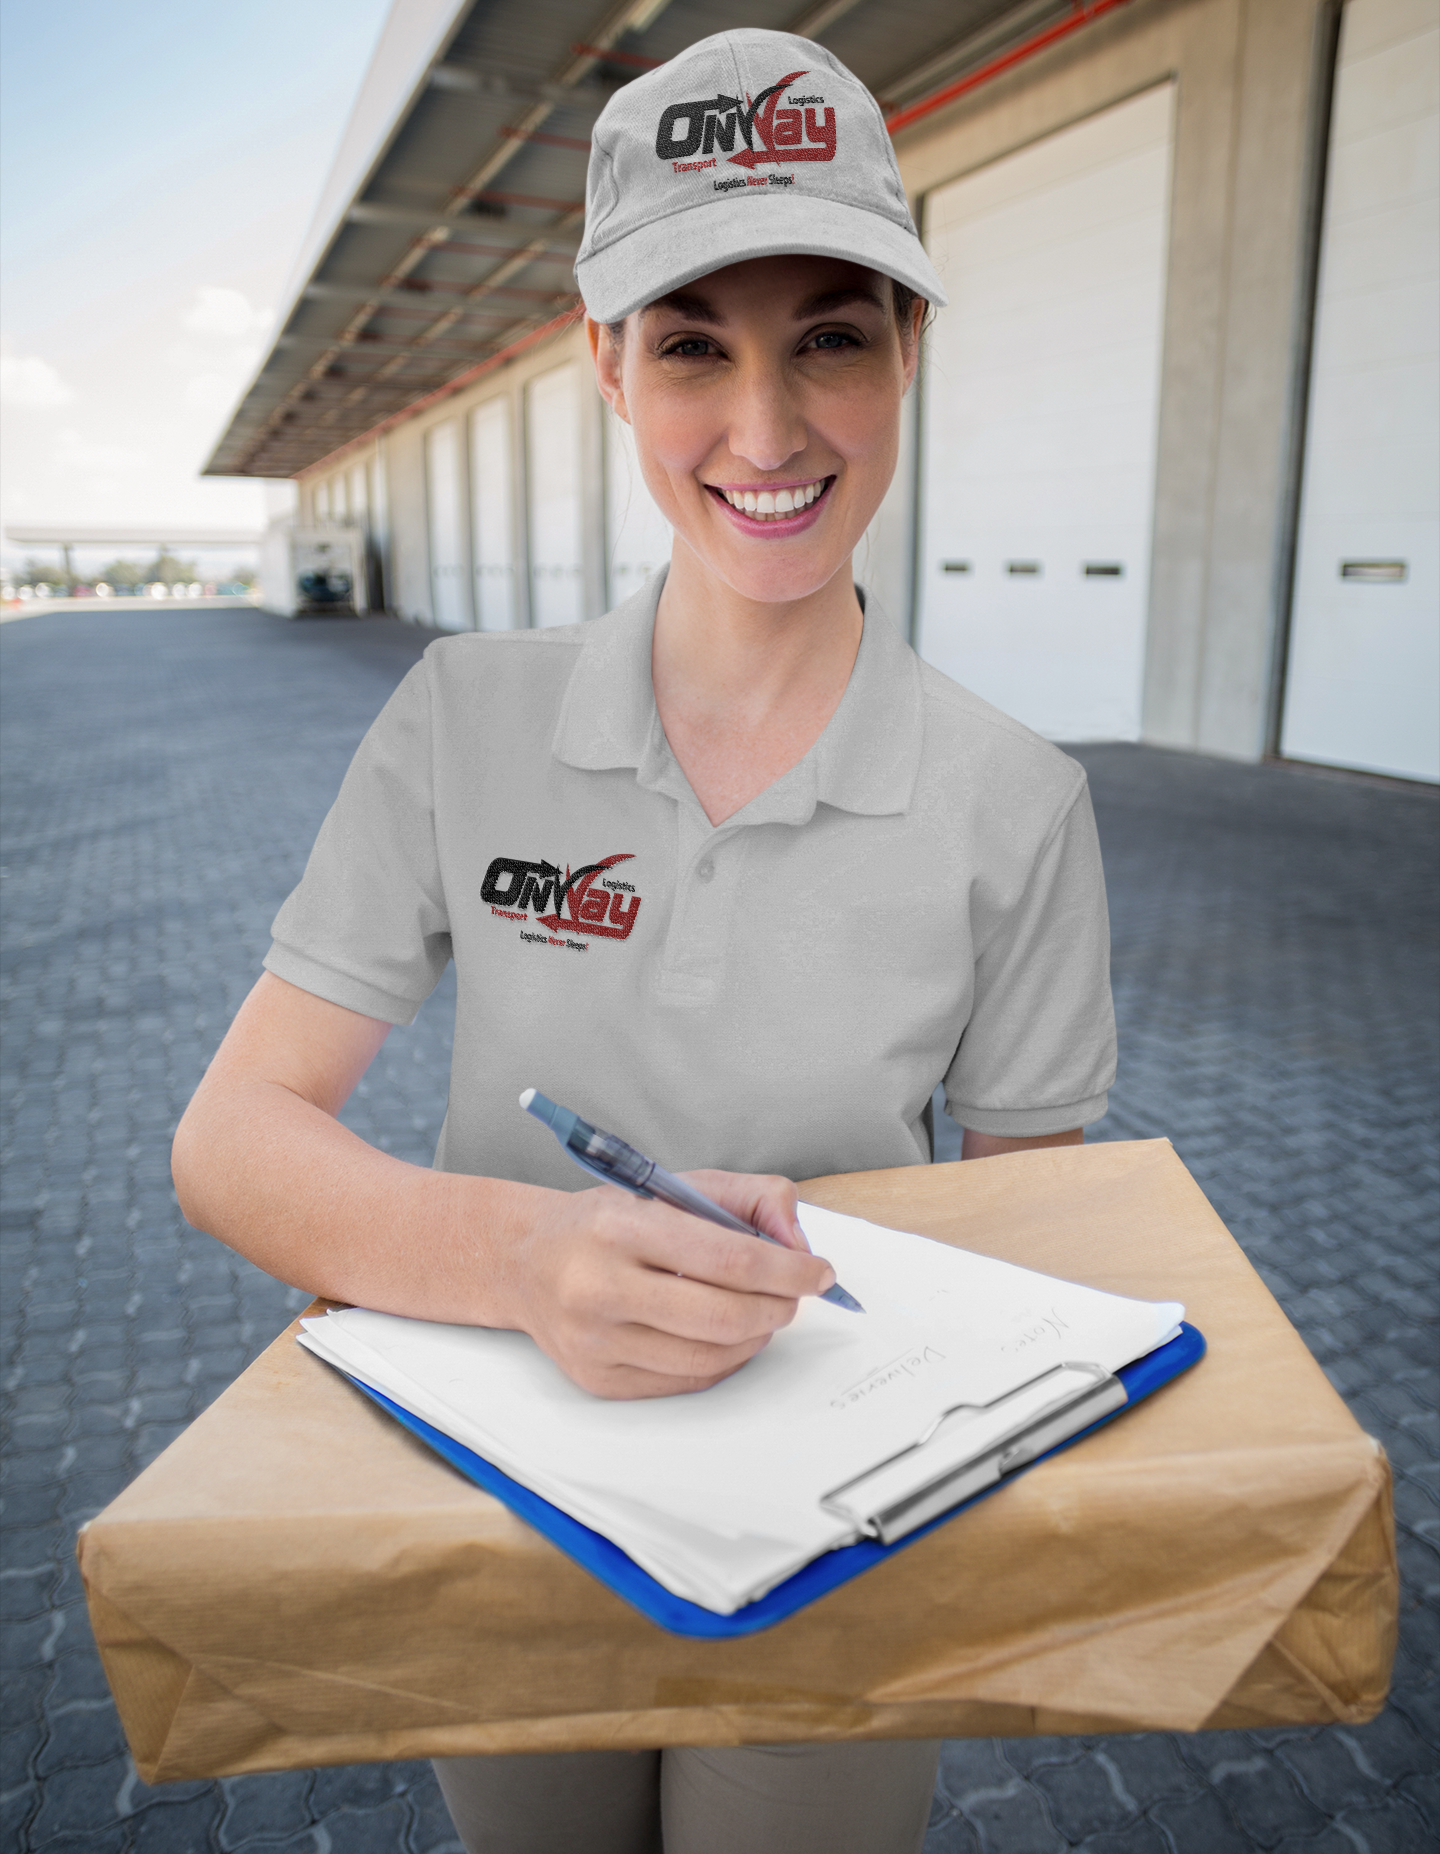 a woman in a polo shirt is holding a box and a clipboard .